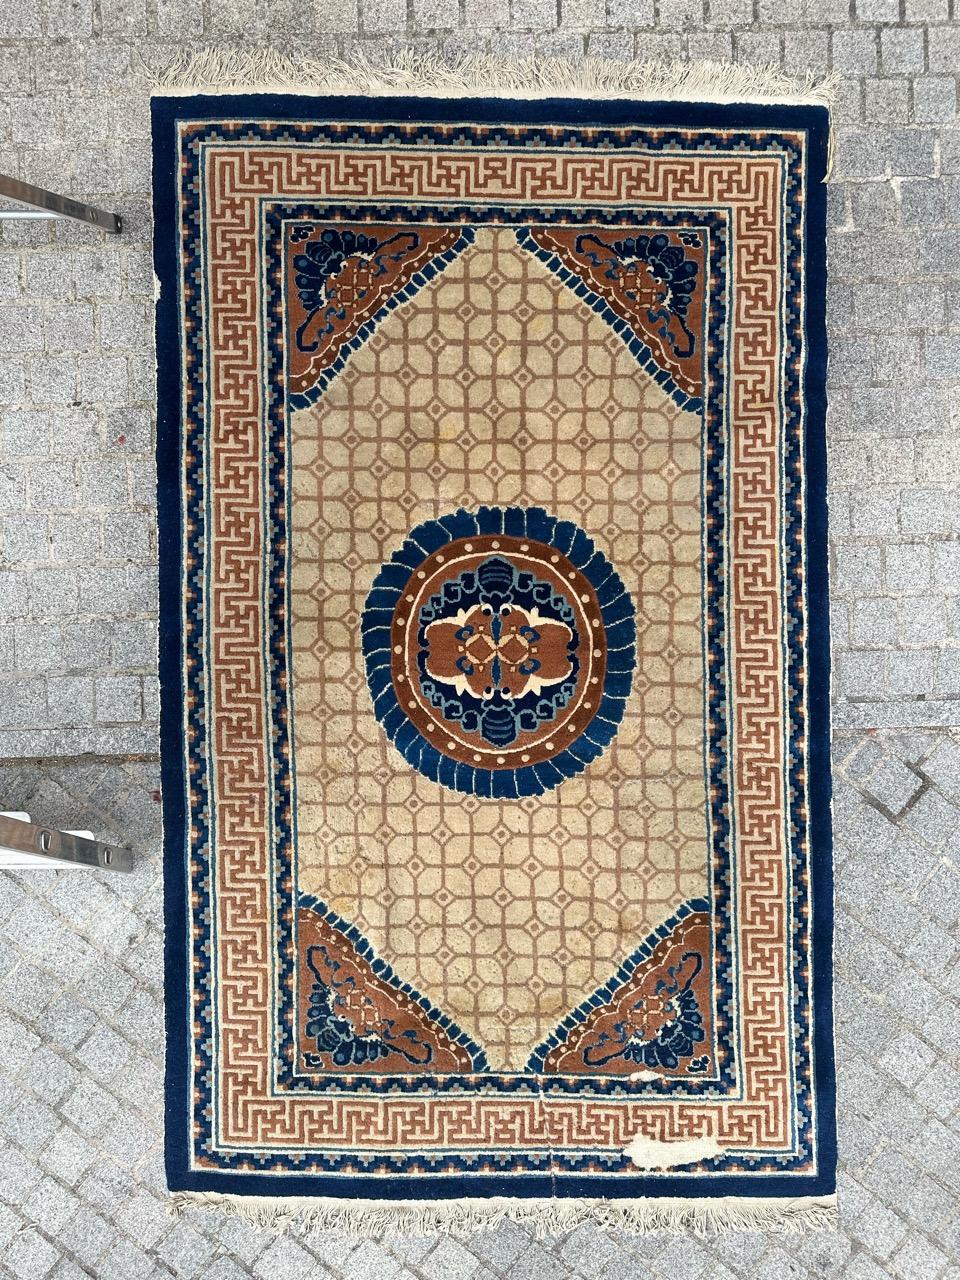 Introducing a stunning mid-century Chinese rug featuring exquisite Chinese Art Deco-style design and captivating colors. This entirely hand-knotted masterpiece showcases a central navy blue medallion adorned with stylized Chinese animal motifs in